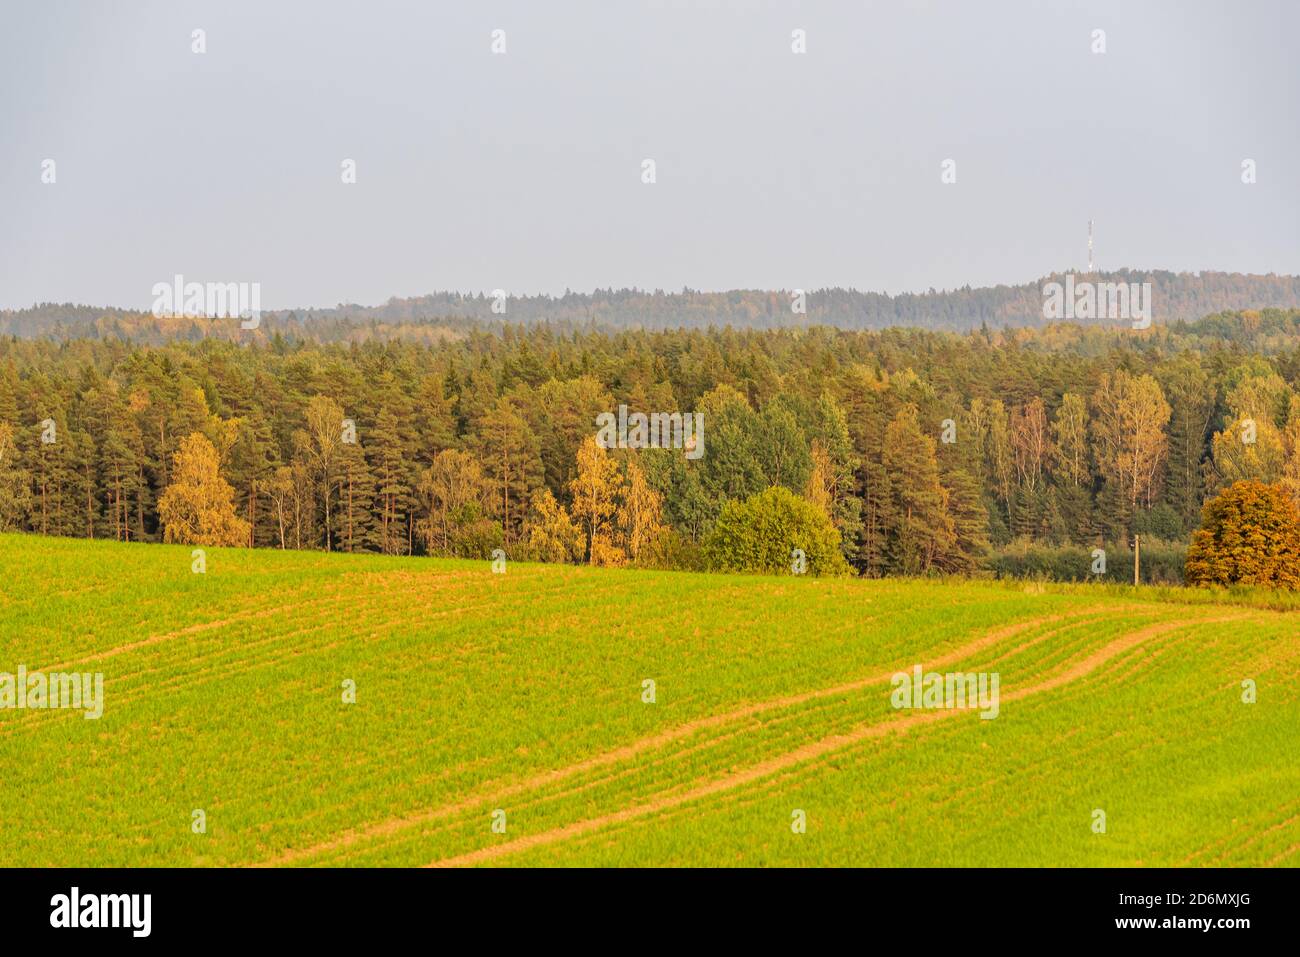 agricultural land cultivated in autumn on uneven ground and trees in the distance Stock Photo